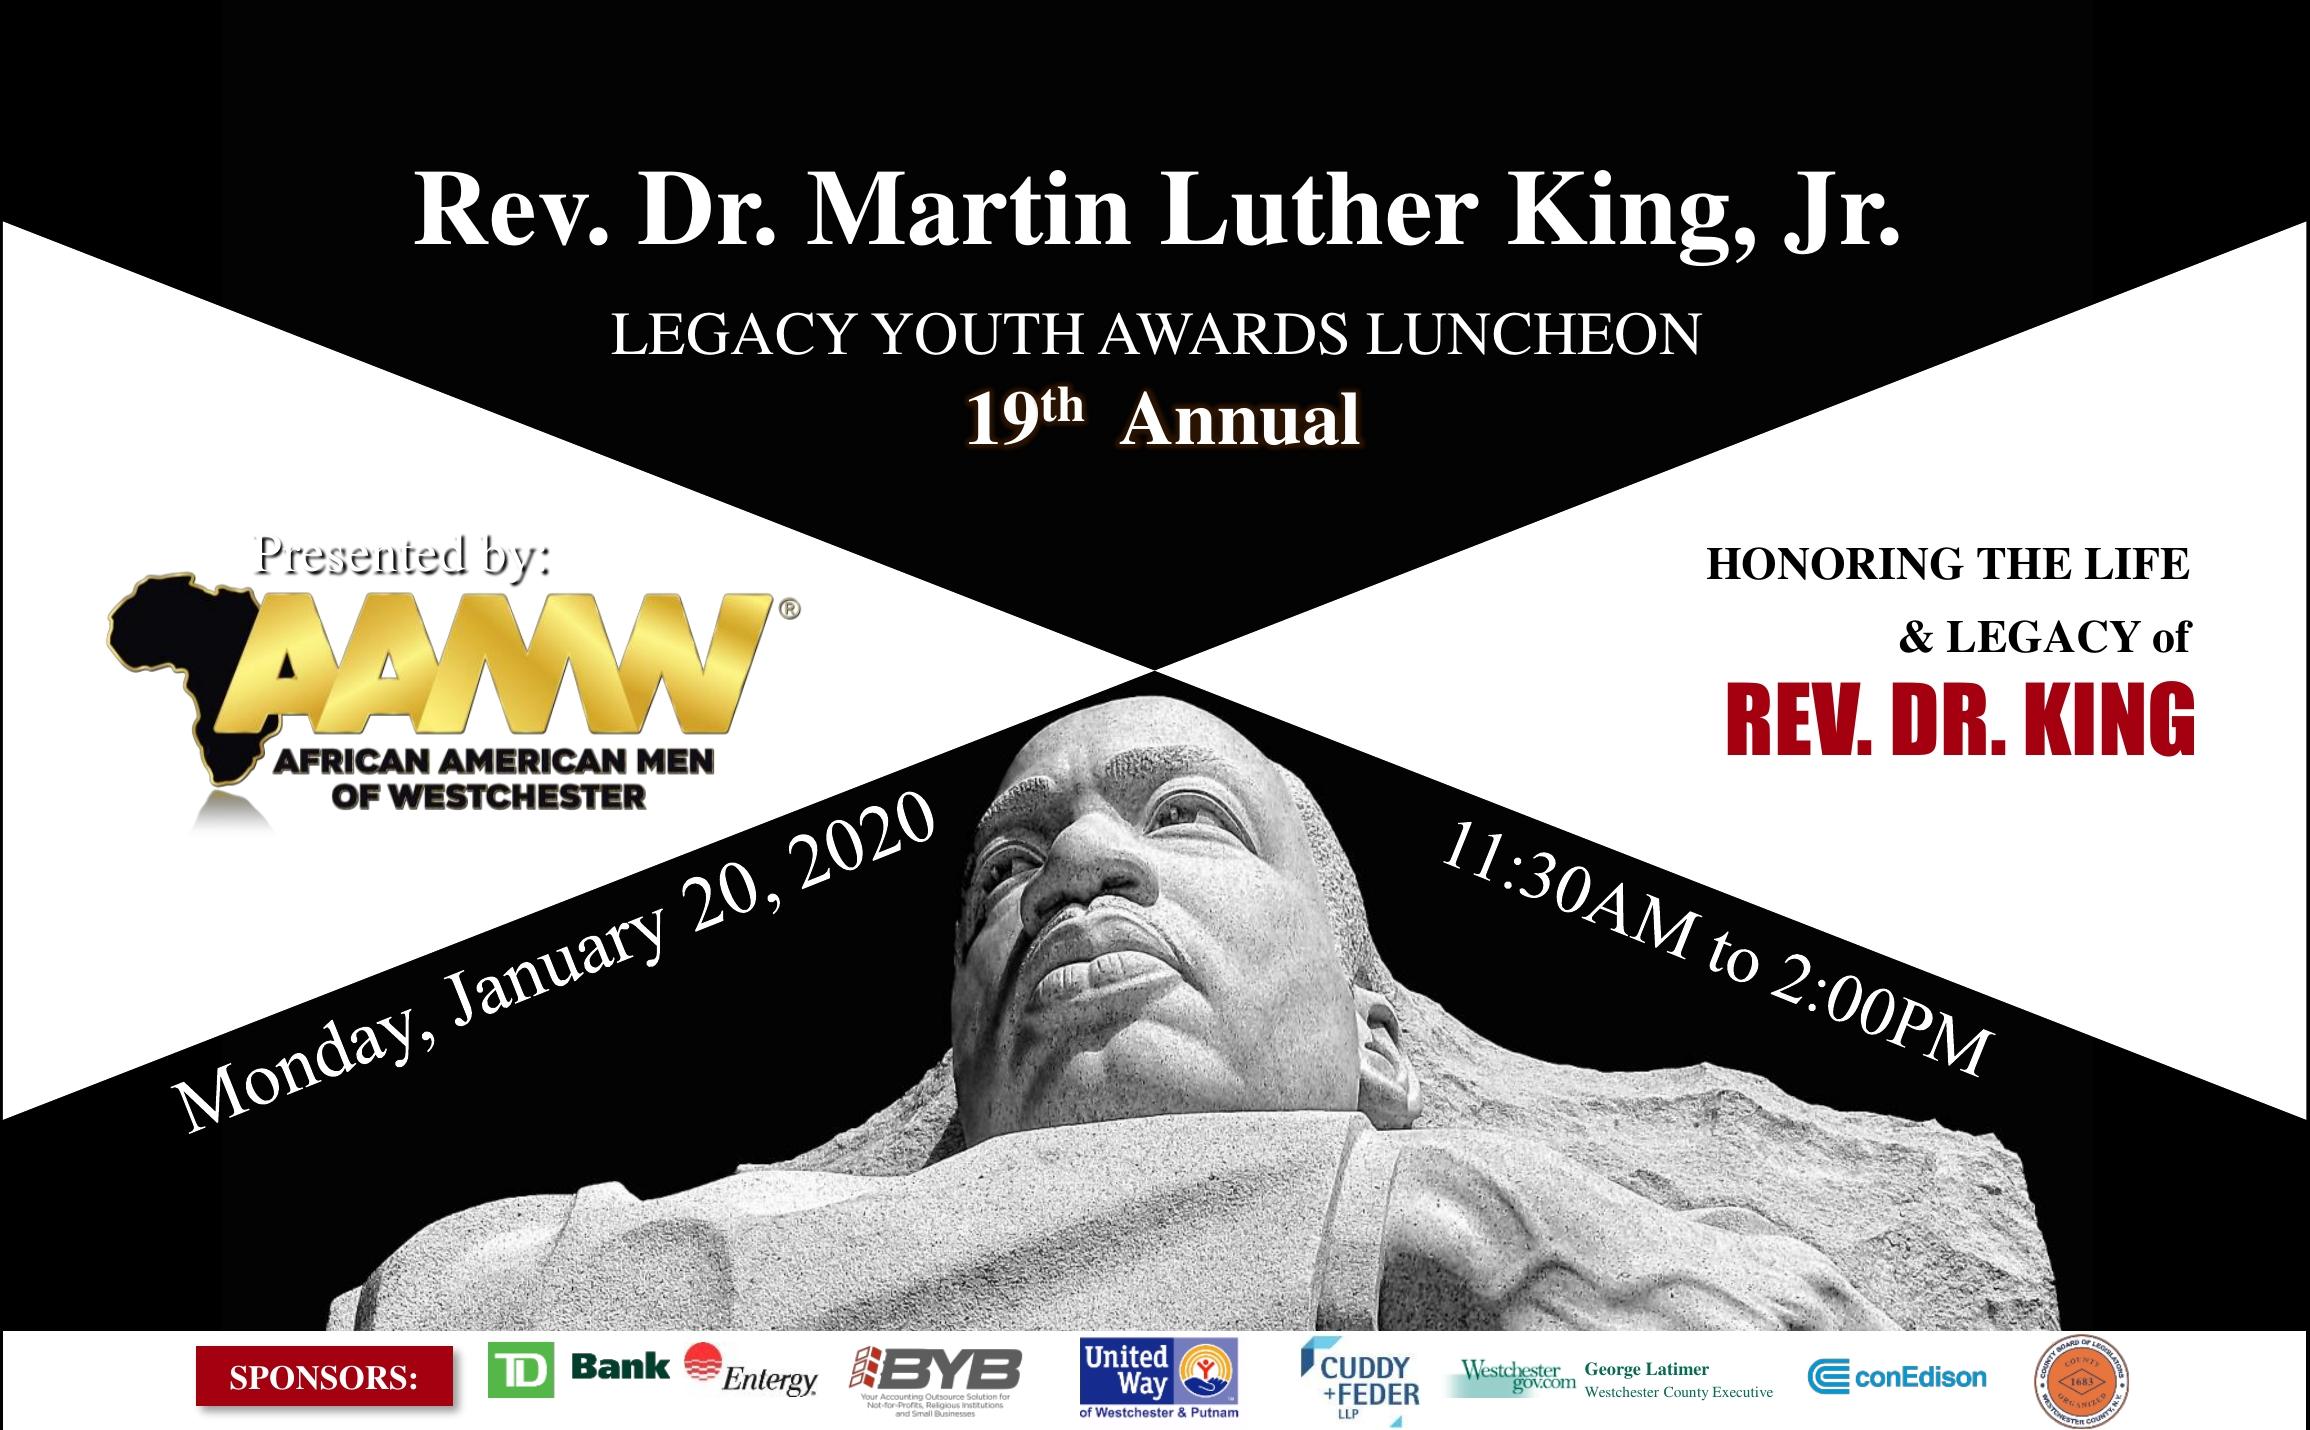 19th Annual Martin Luther King, Jr. Youth Legacy Awards Luncheon